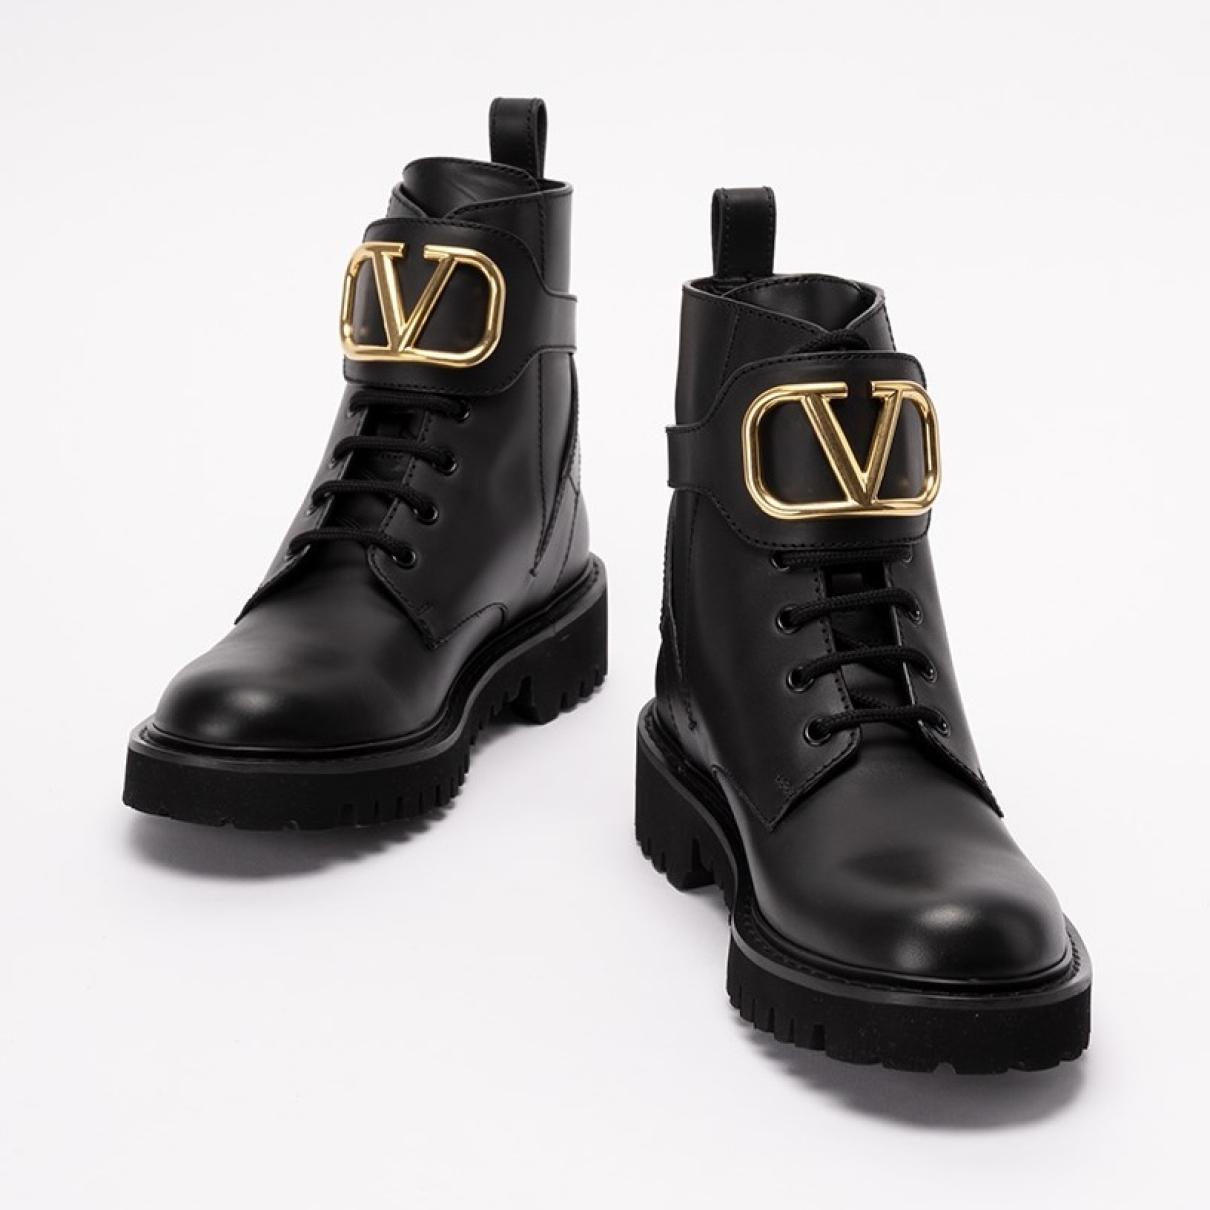 VLogo leather boots - 3